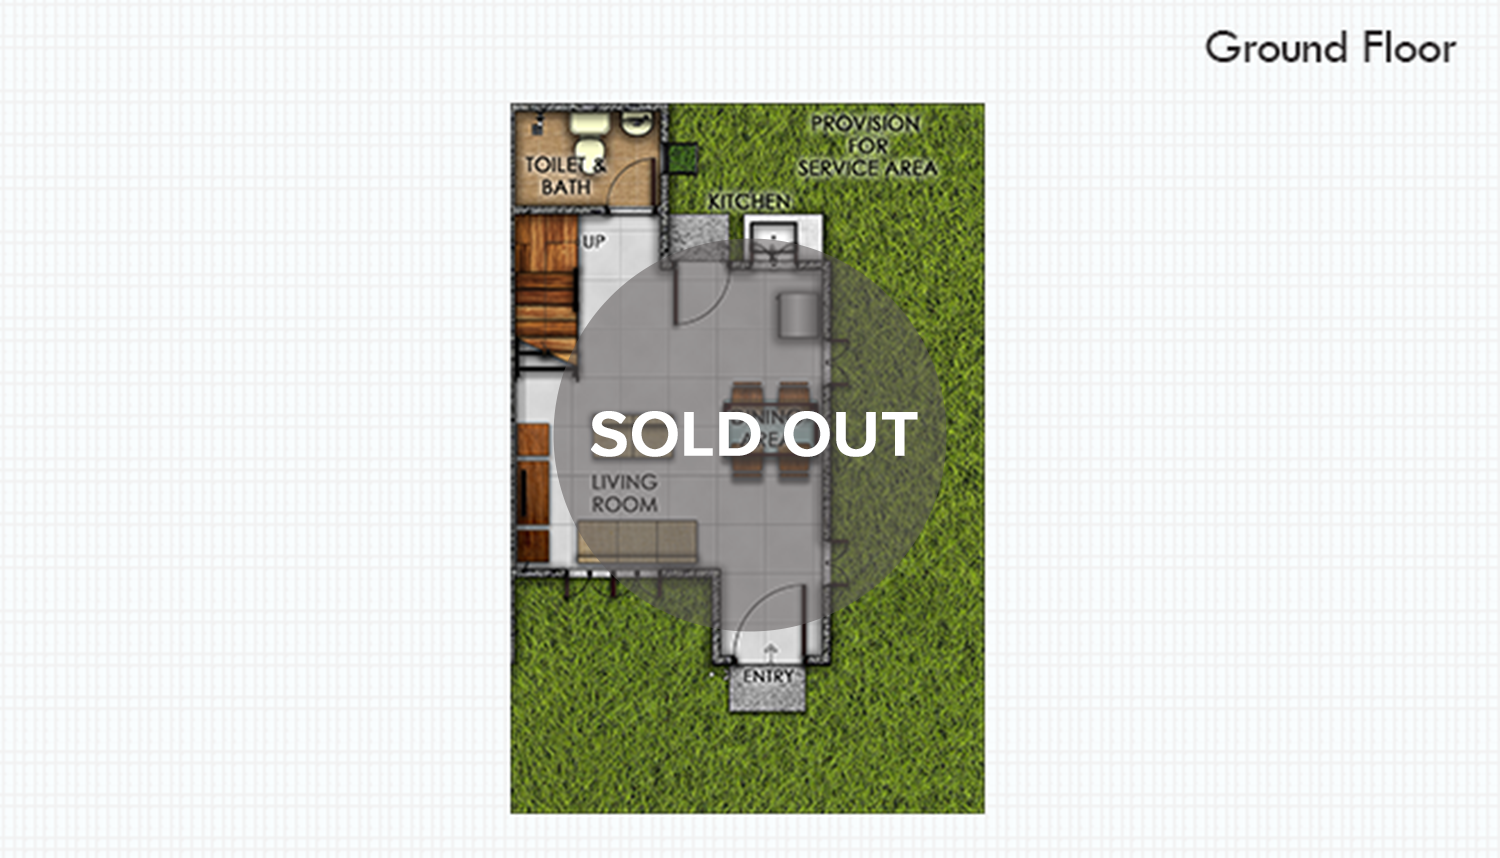 /assets/properties-house-model-gallery-and-landmarks-icons/lumina-home-models/home-model-gallery/angeli-duplex/lumina-angeli-duplex-ground-floor-plan-sold-out.png